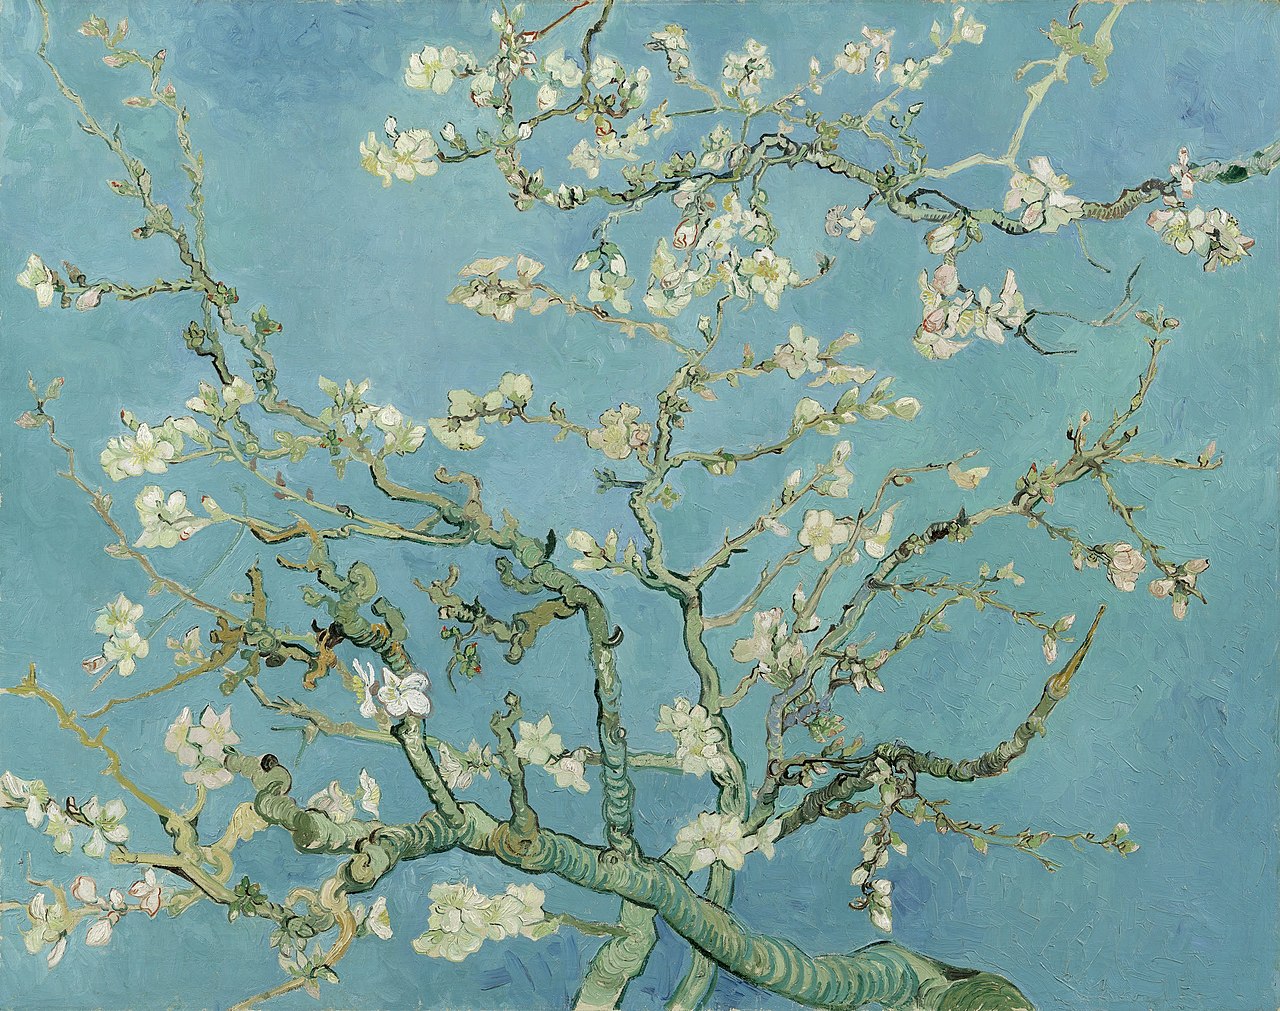 Vincent van Gogh, life and works of the record-breaking Dutch painter